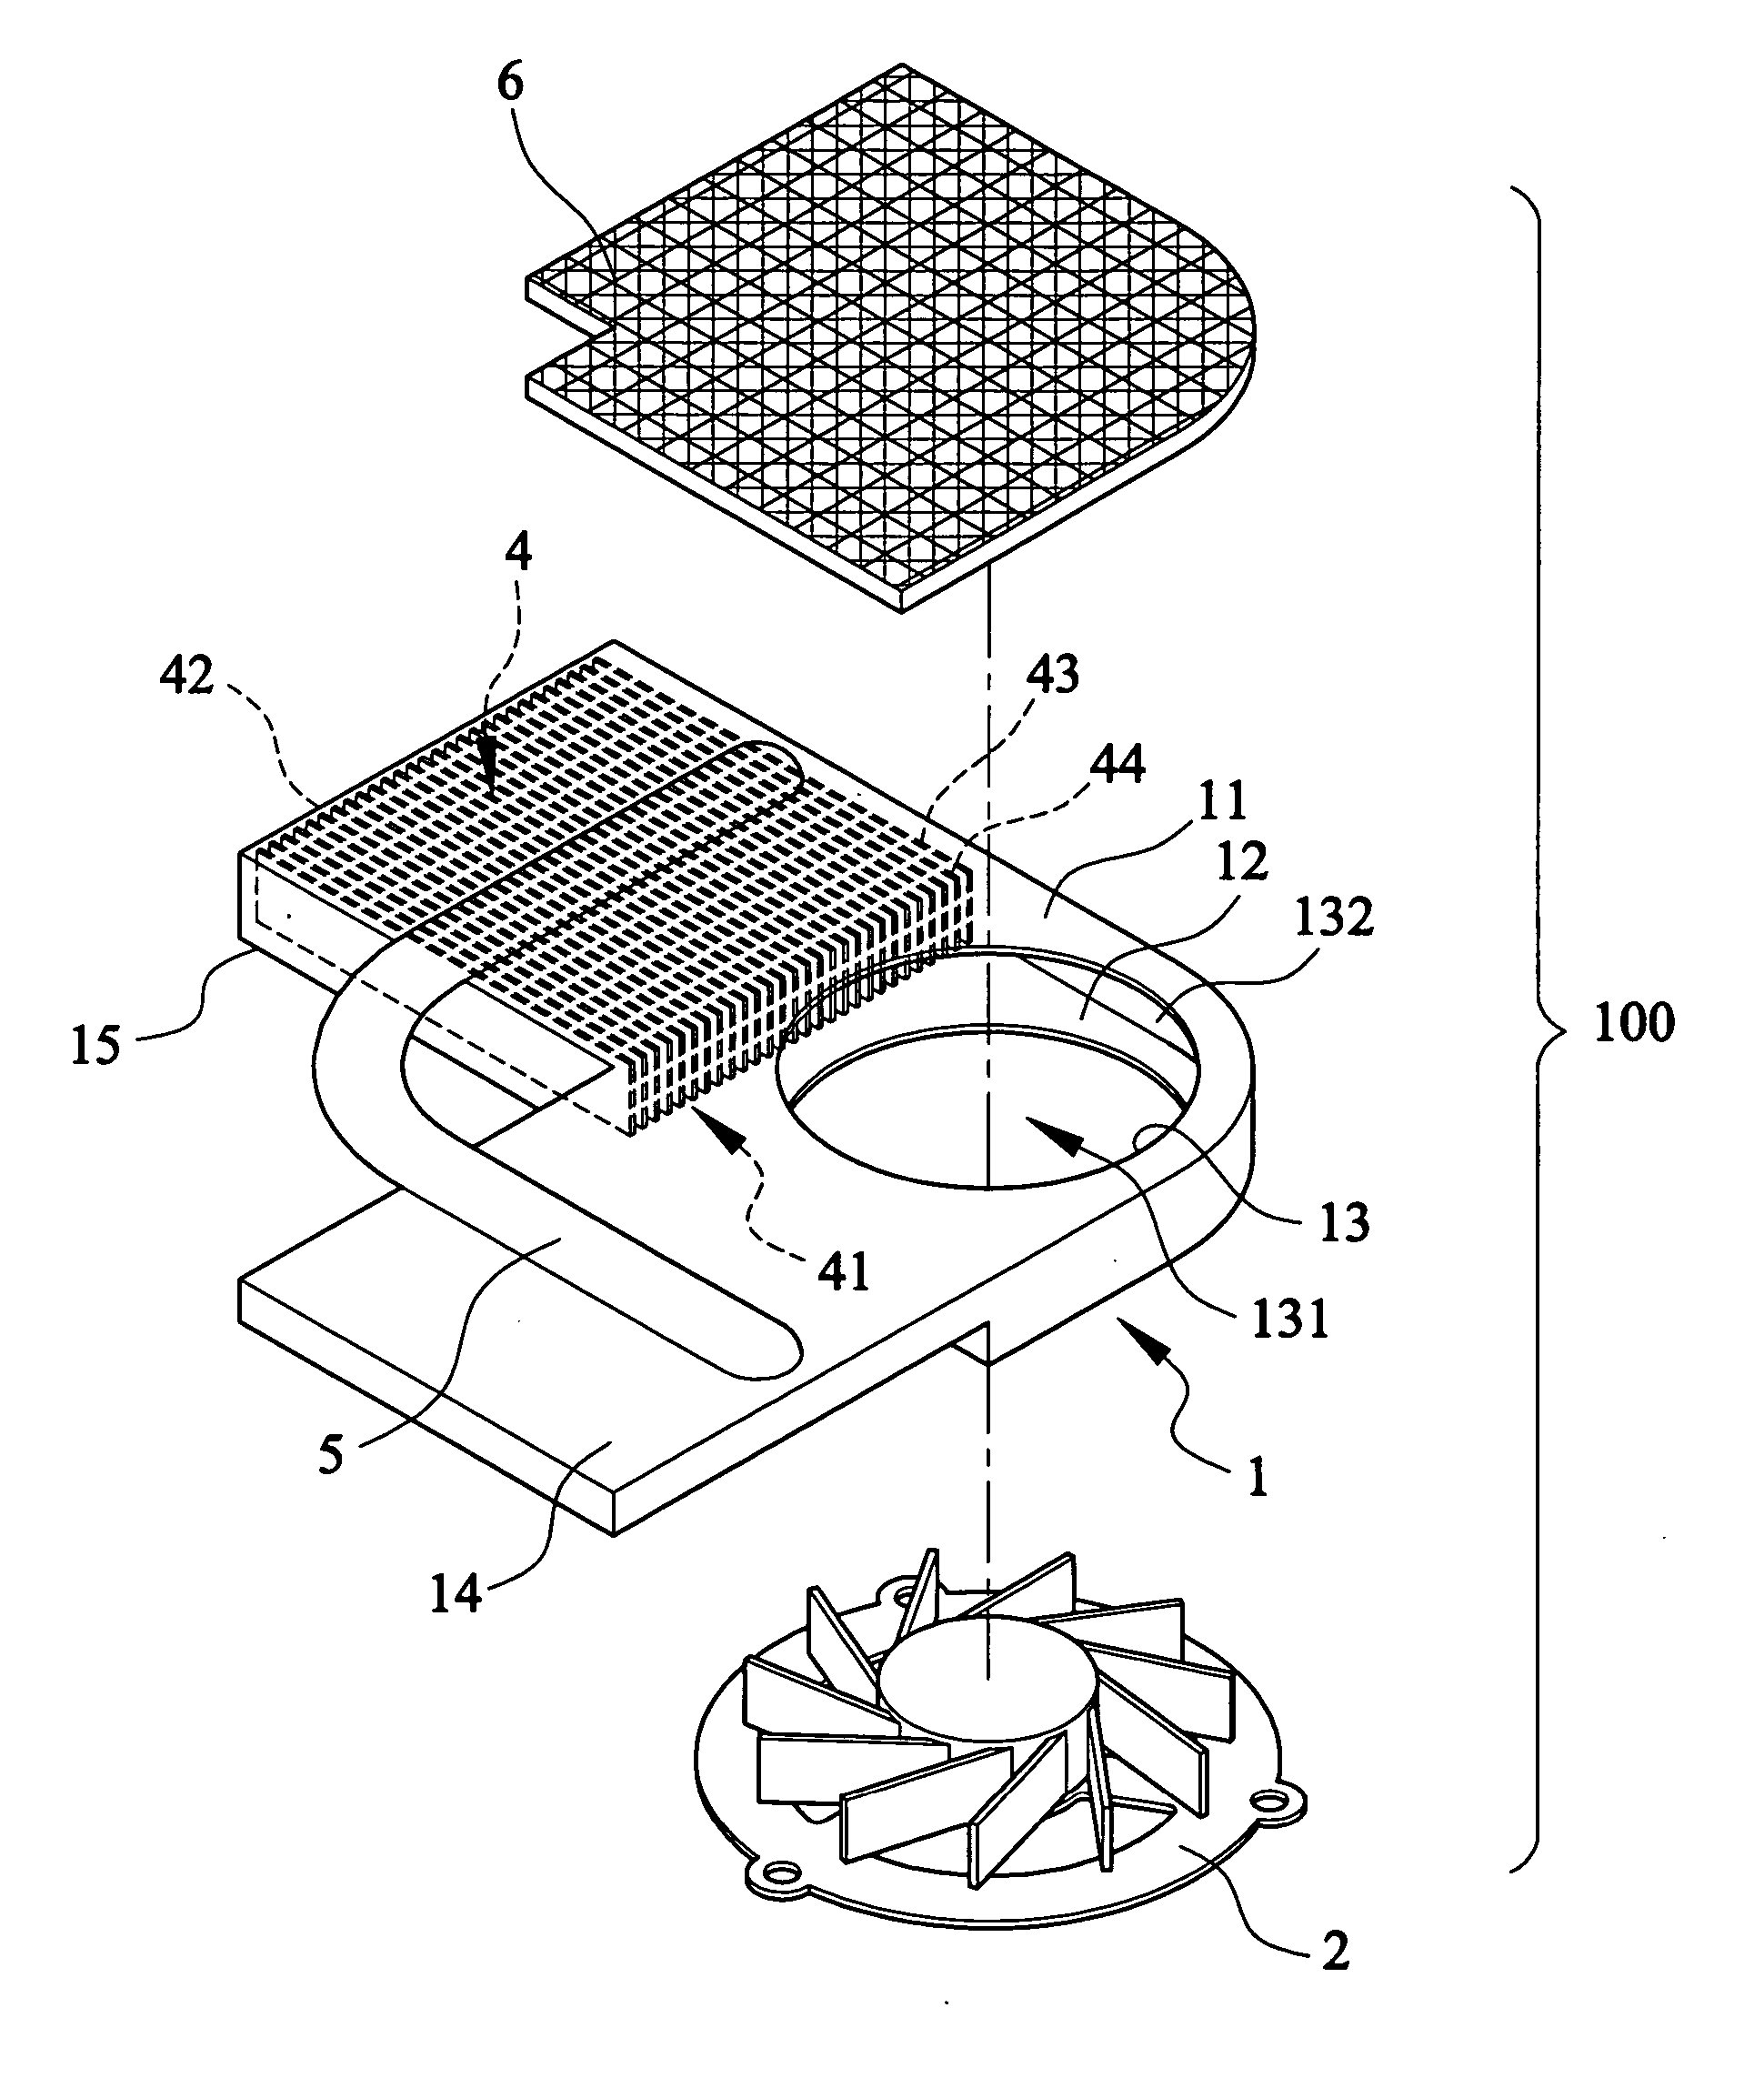 Heat dissipation device having thermally conductive cover board